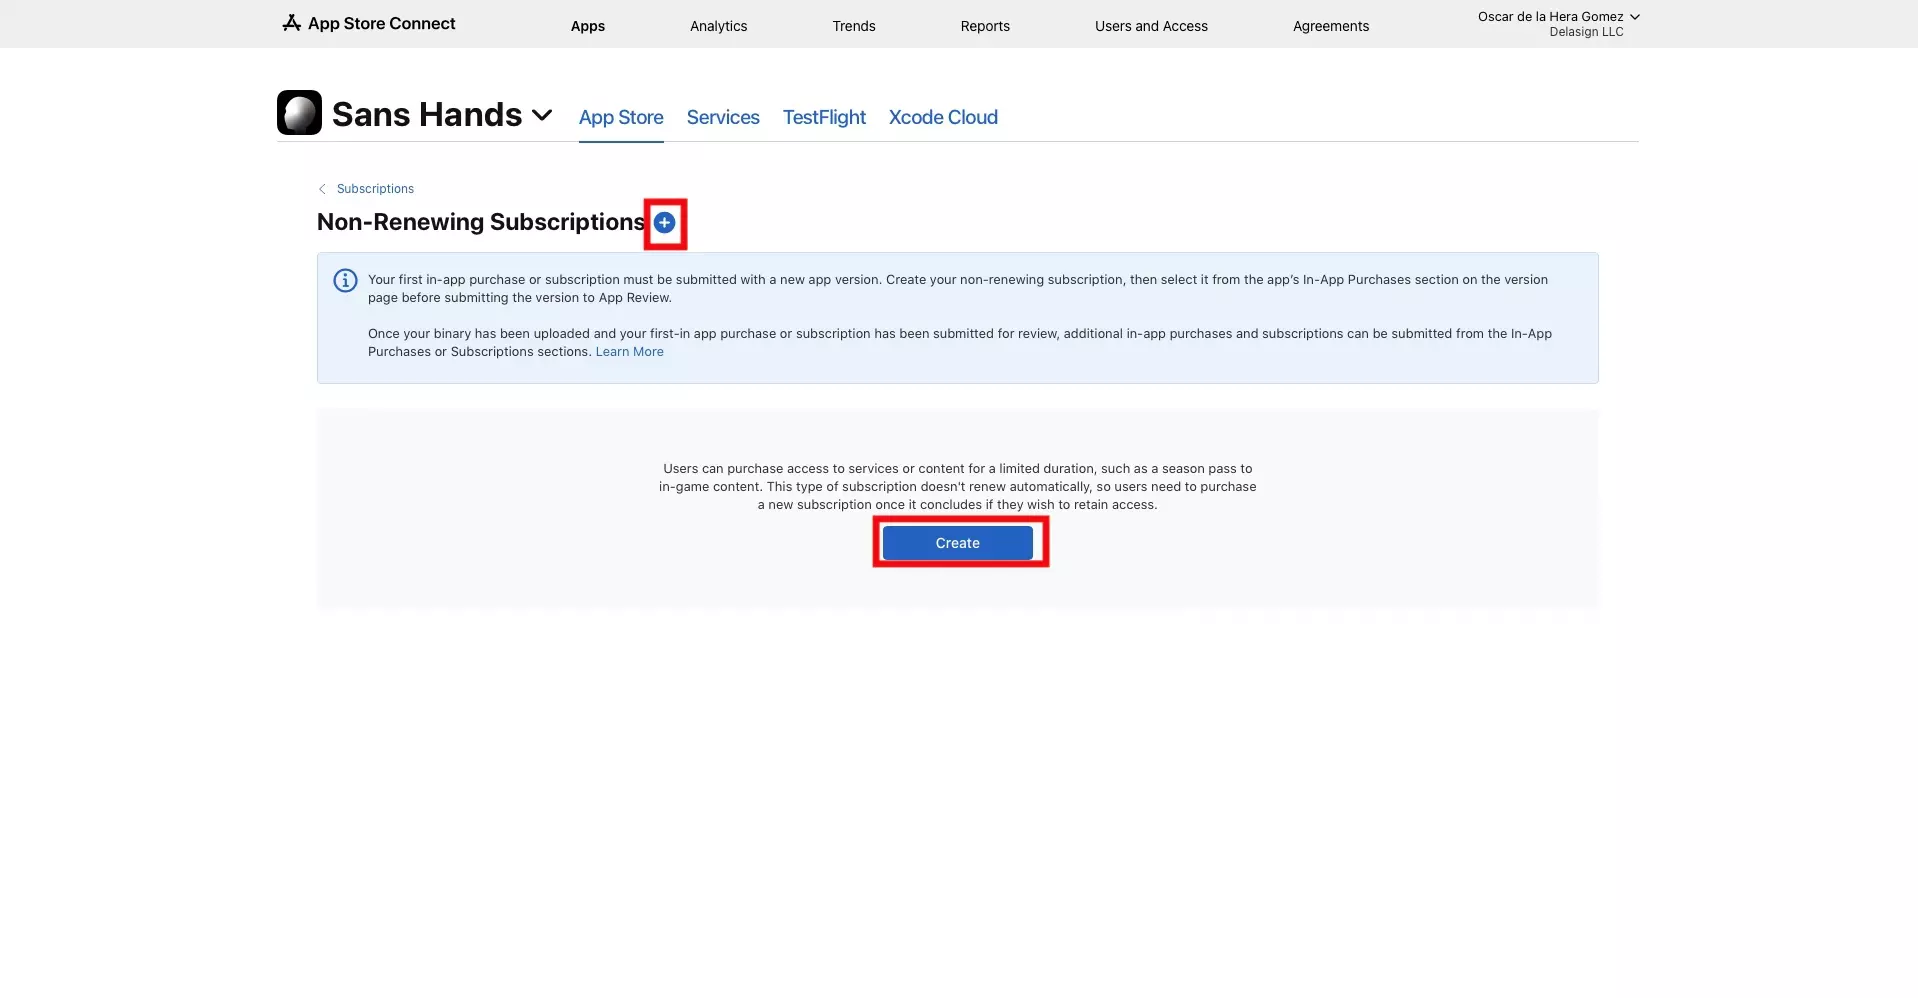 A screenshot of the App Store Connect Non-Renewing Subscriptions page with a highlight on the + button next to the Non-Renewing Subscriptions title. We have also highlighted the Create button beneath the title, which only appears if you have not created a non-renewing subscription beforehand. Either of these are clickable and will allow you to create a new non-renewing subscription.